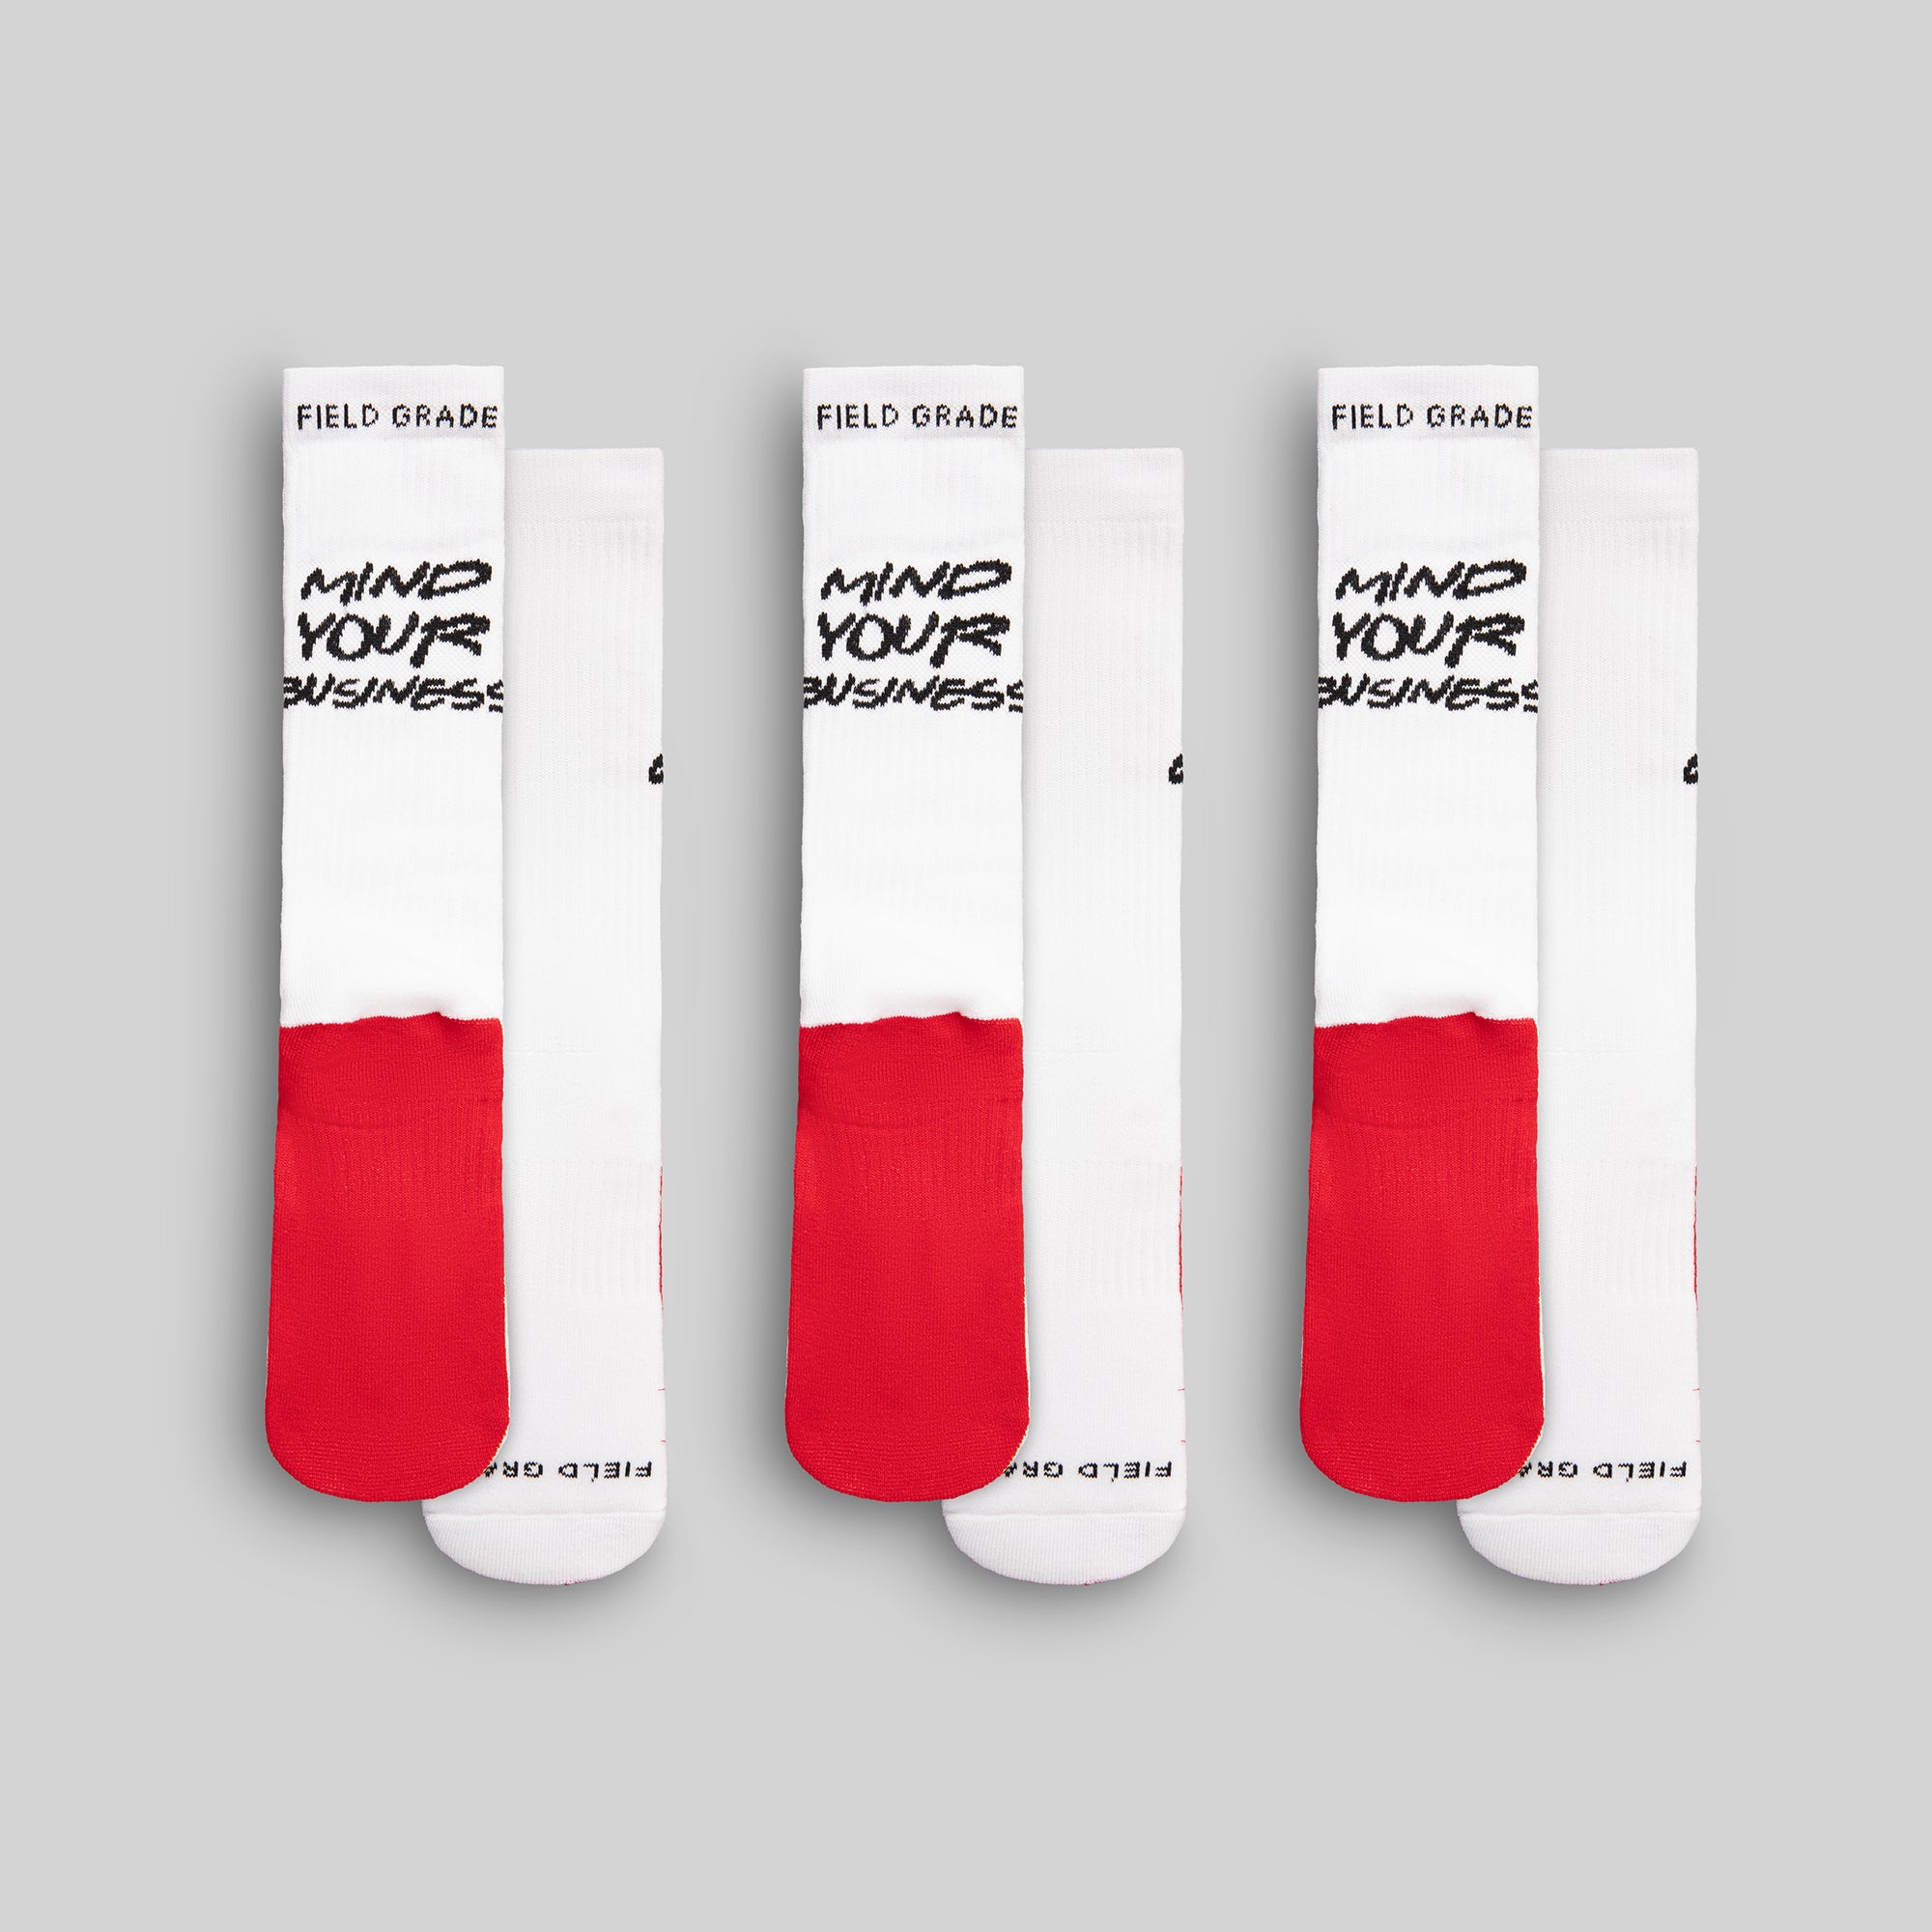 FIELD GRADE CUSHIONED CREW SOCKS - MIND YOUR BUSINESS WHITE PACK